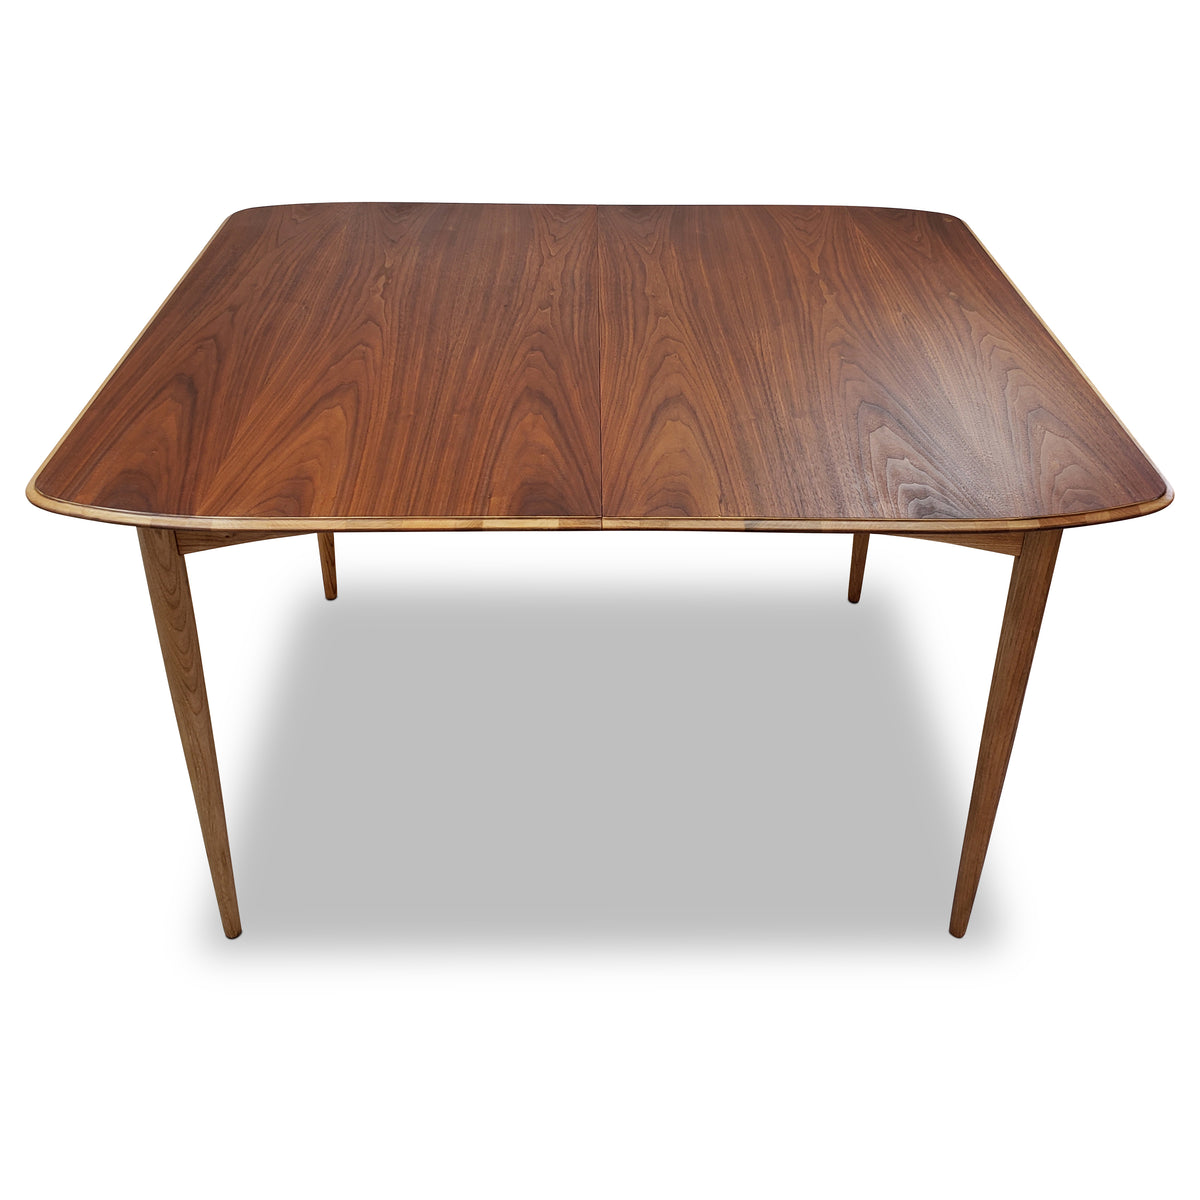 Vintage Deilcraft Dining Table with Two Leaves